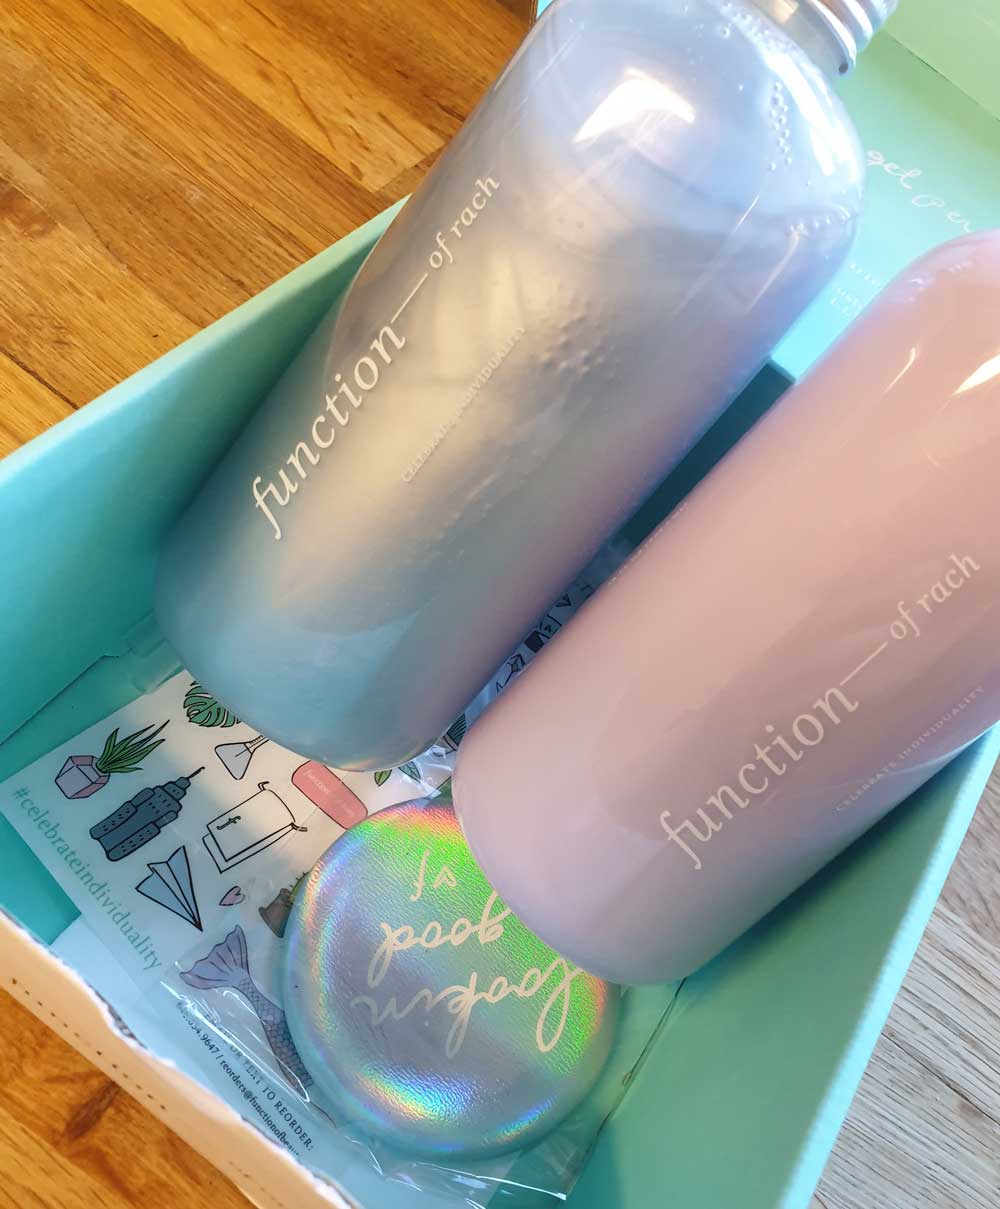 function of beauty - shampoo and conditioner review